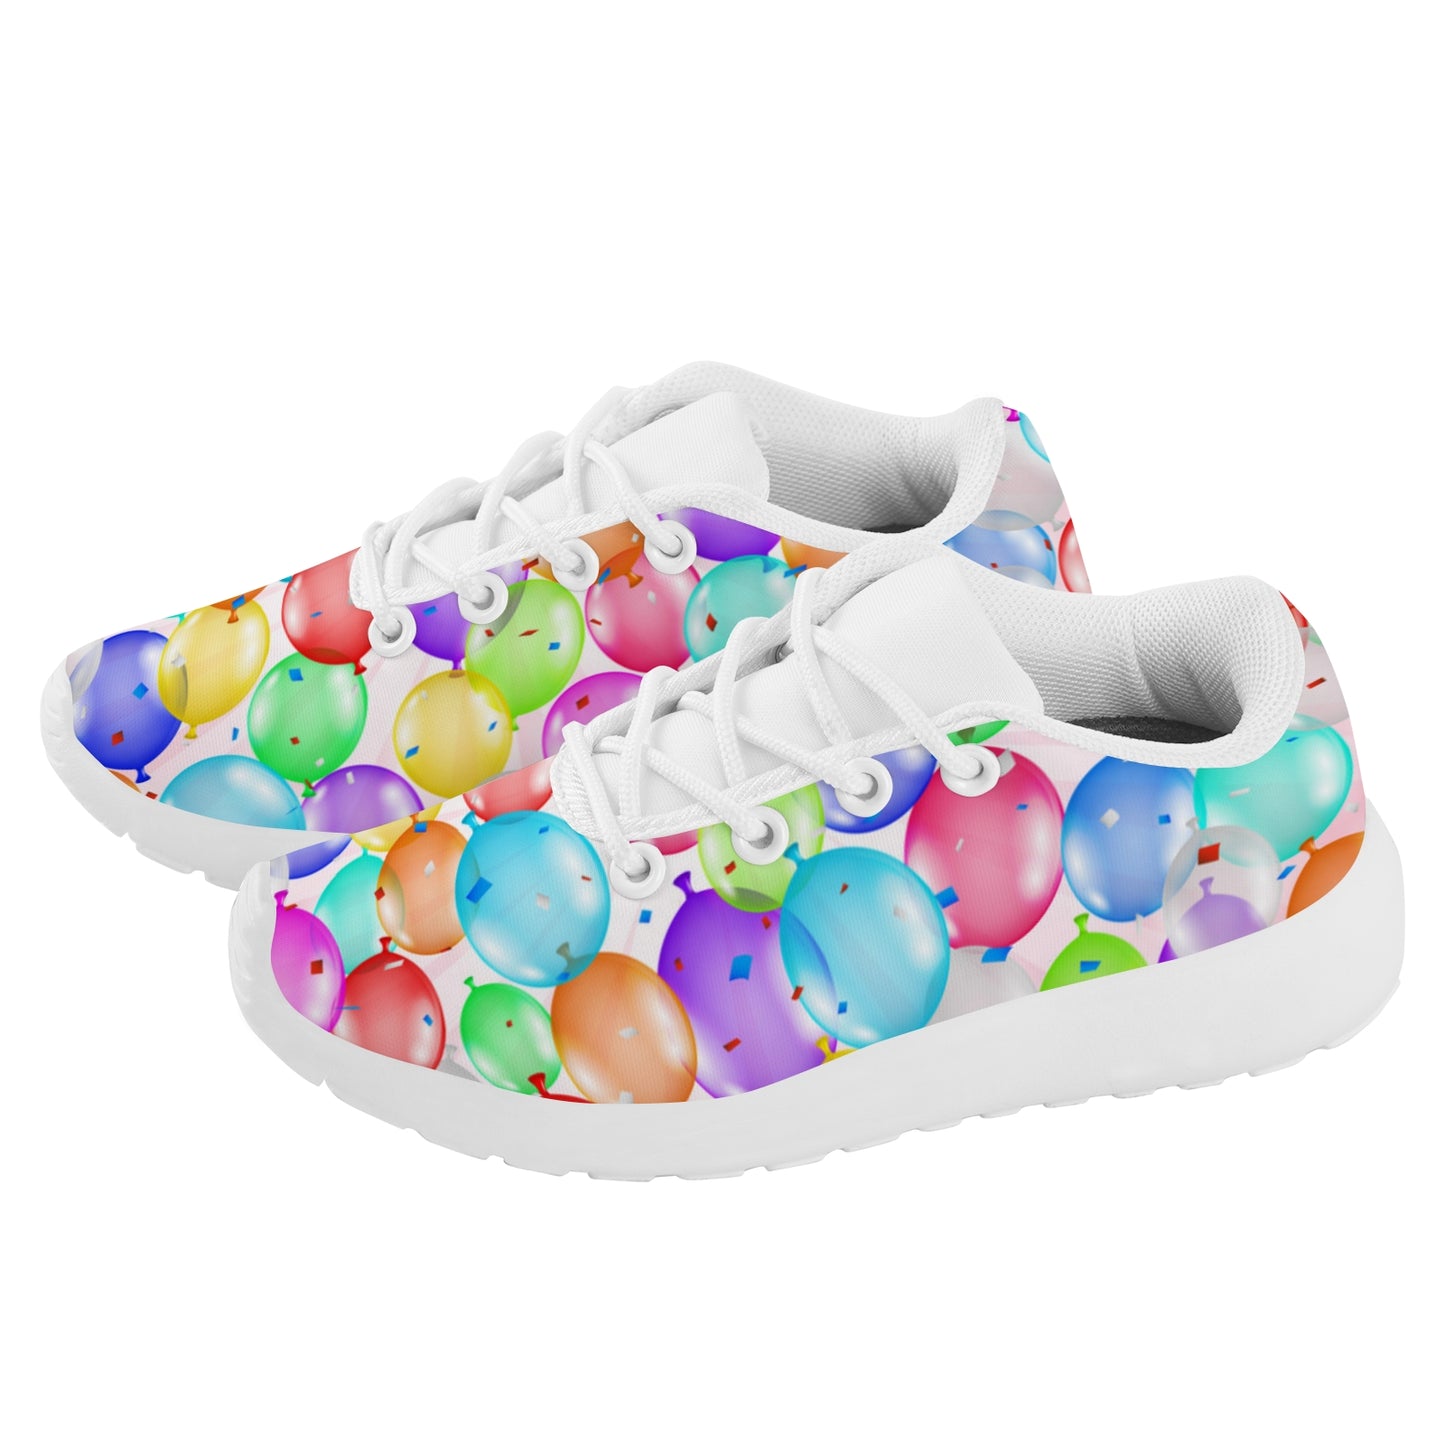 Kid's Sneakers - Party Time!